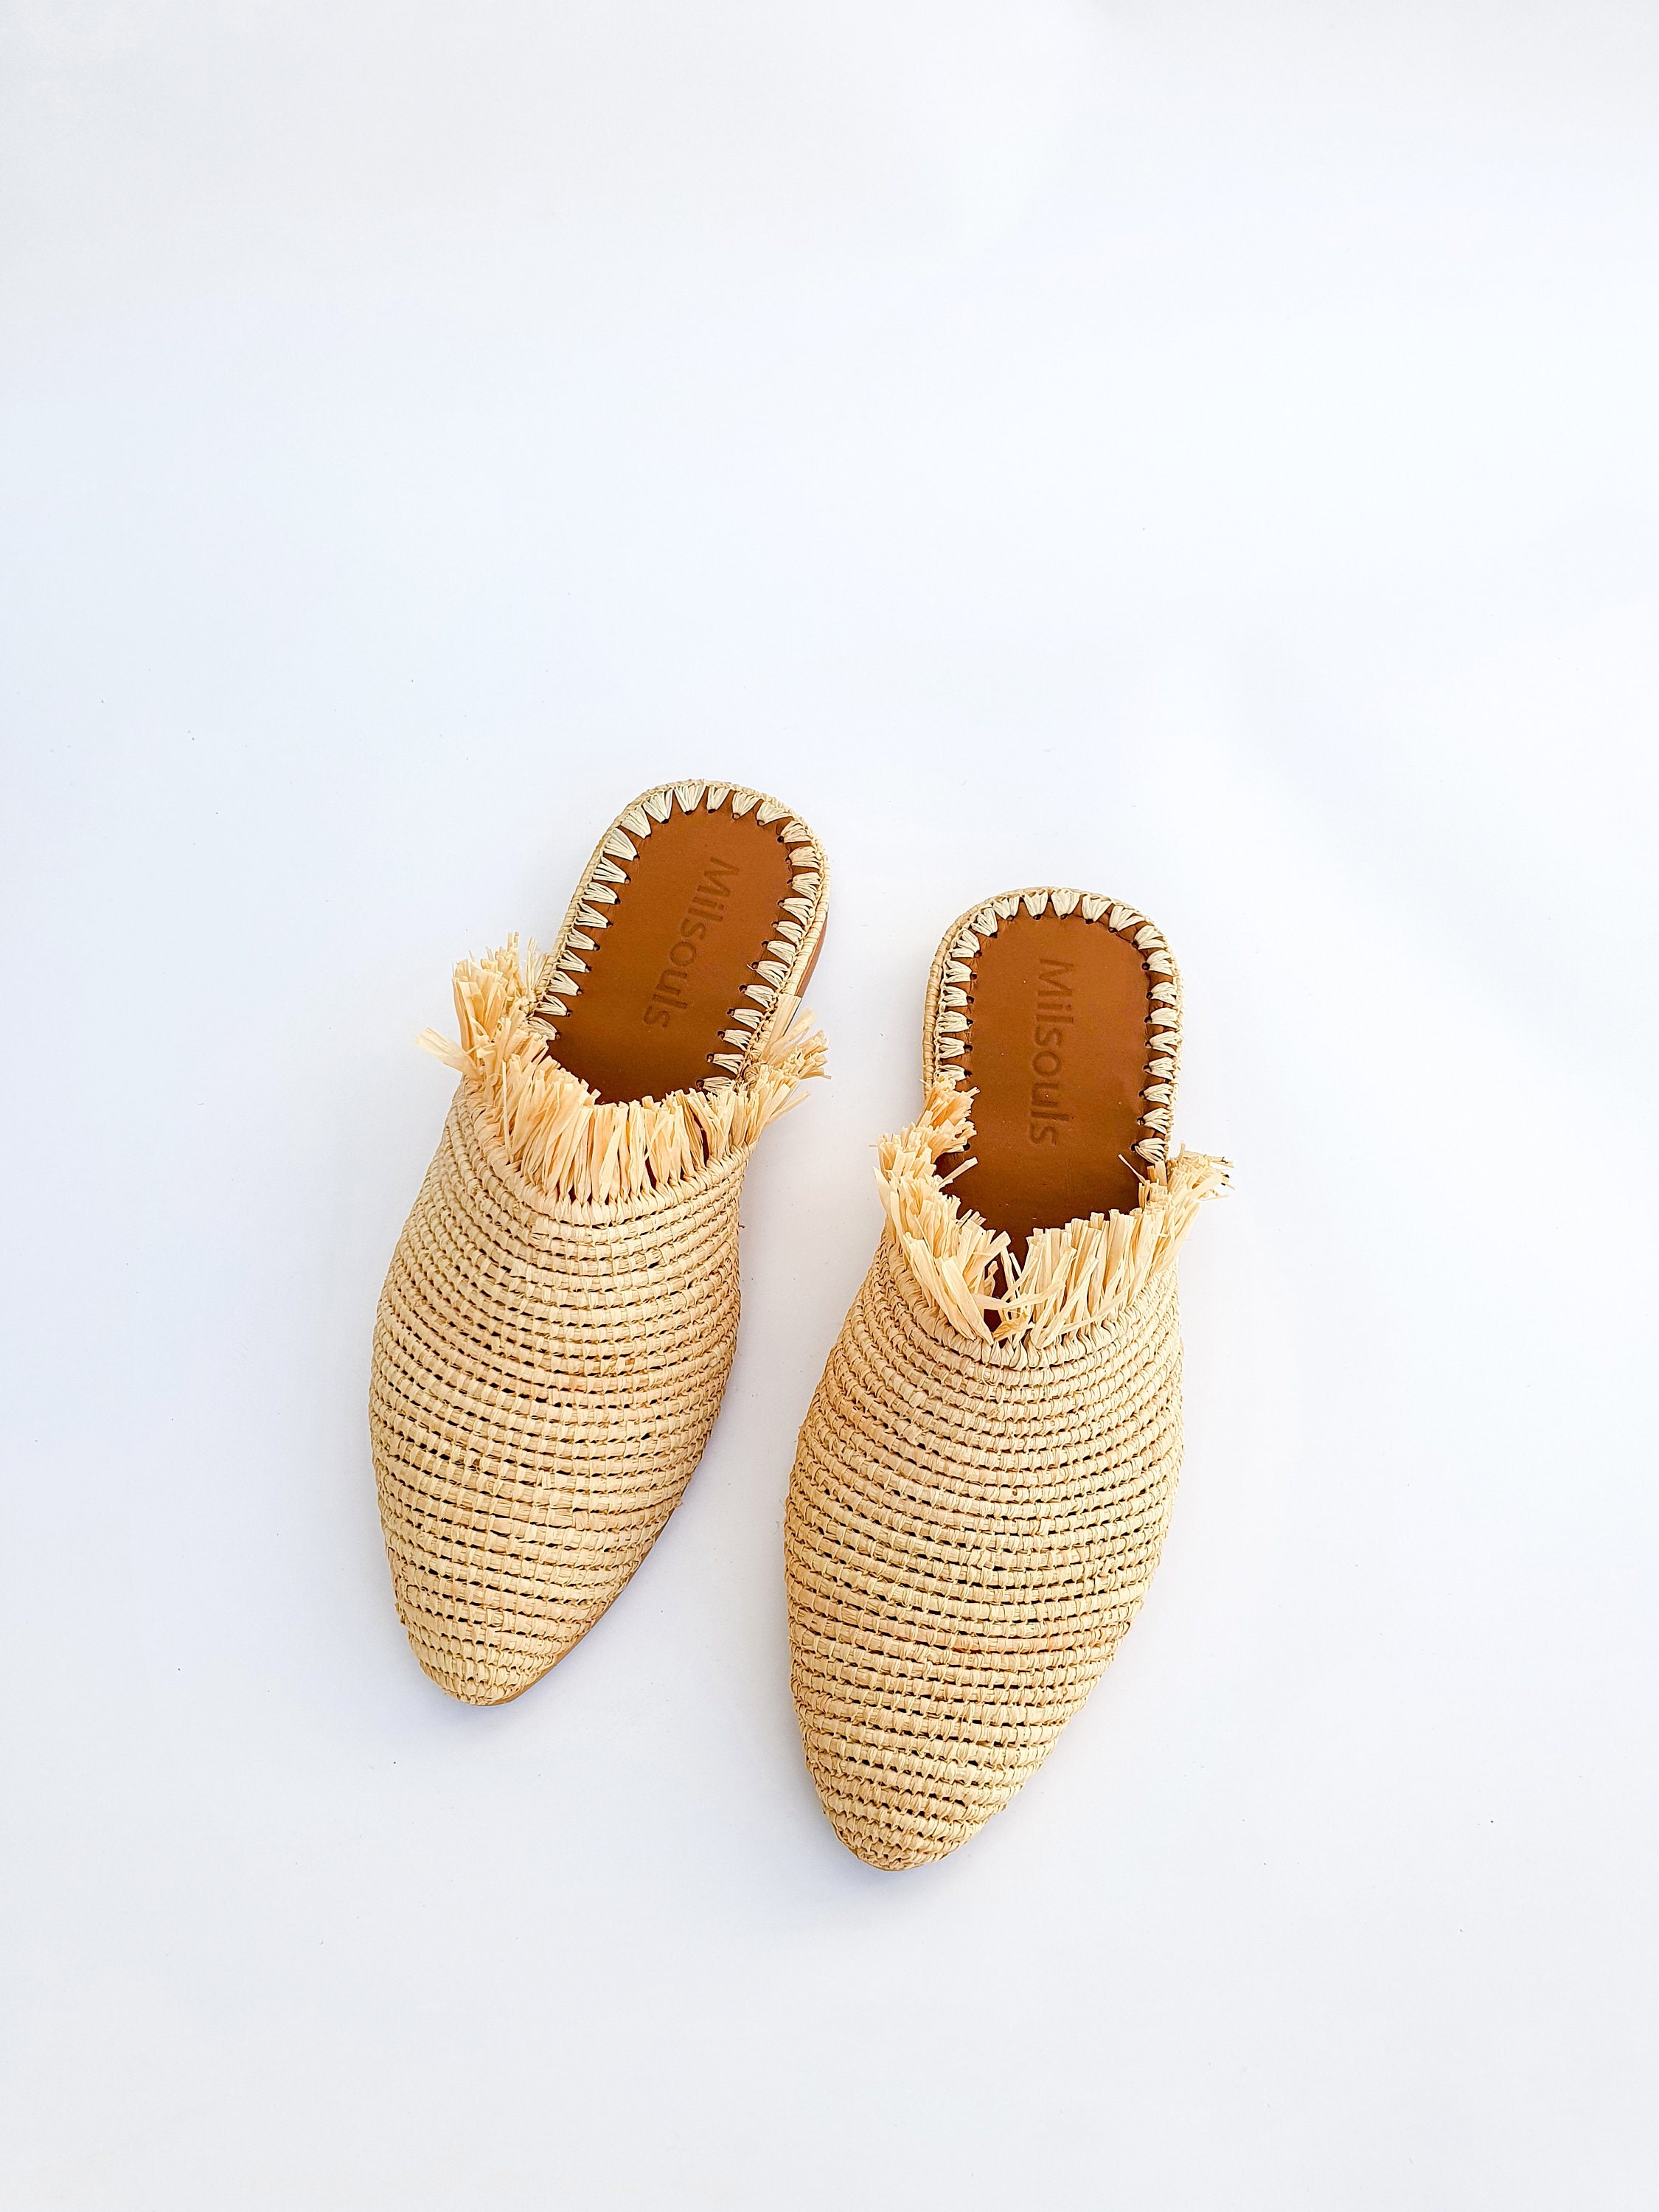 Raffia shoes handmade slippers summer mules Moroccan shoes | Etsy